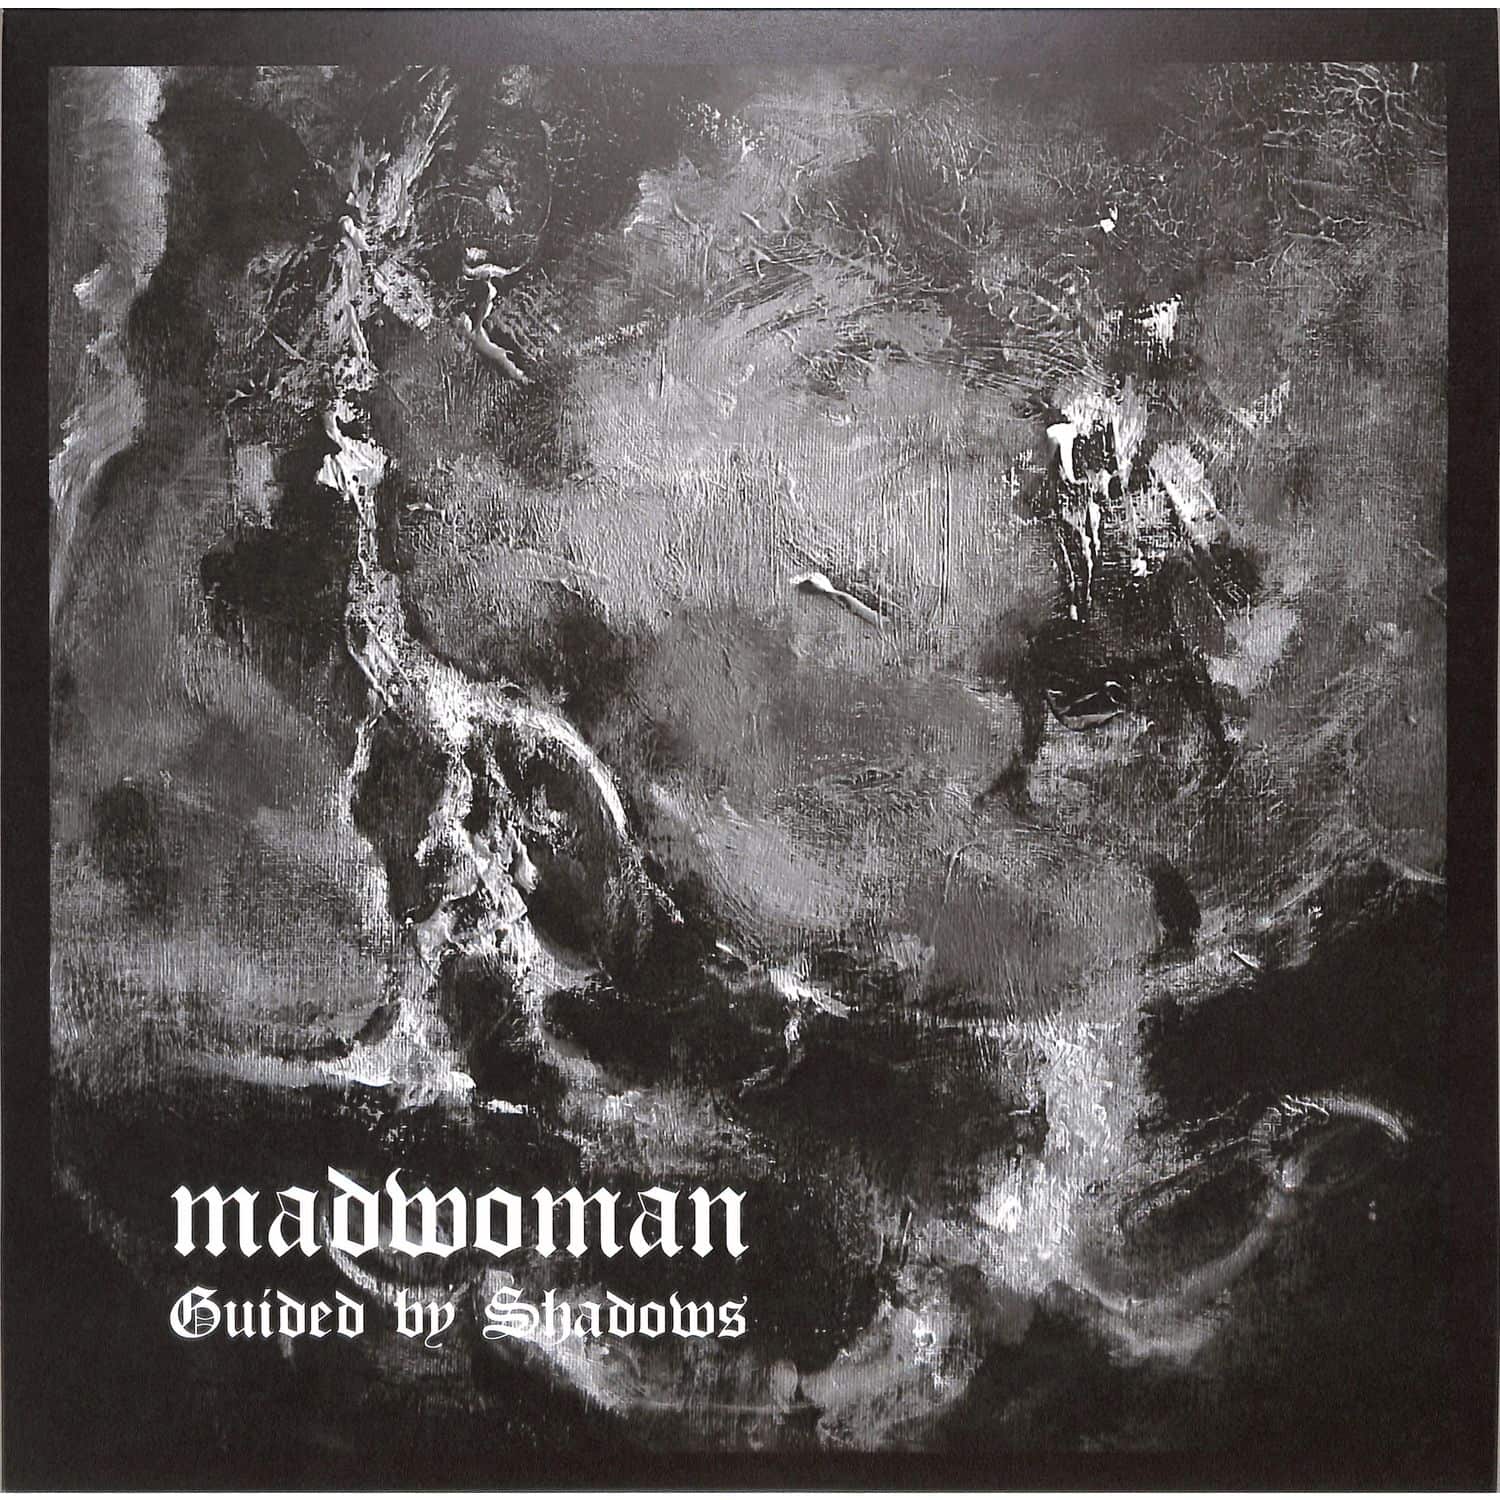 madwoman - GUIDED BY SHADOWS